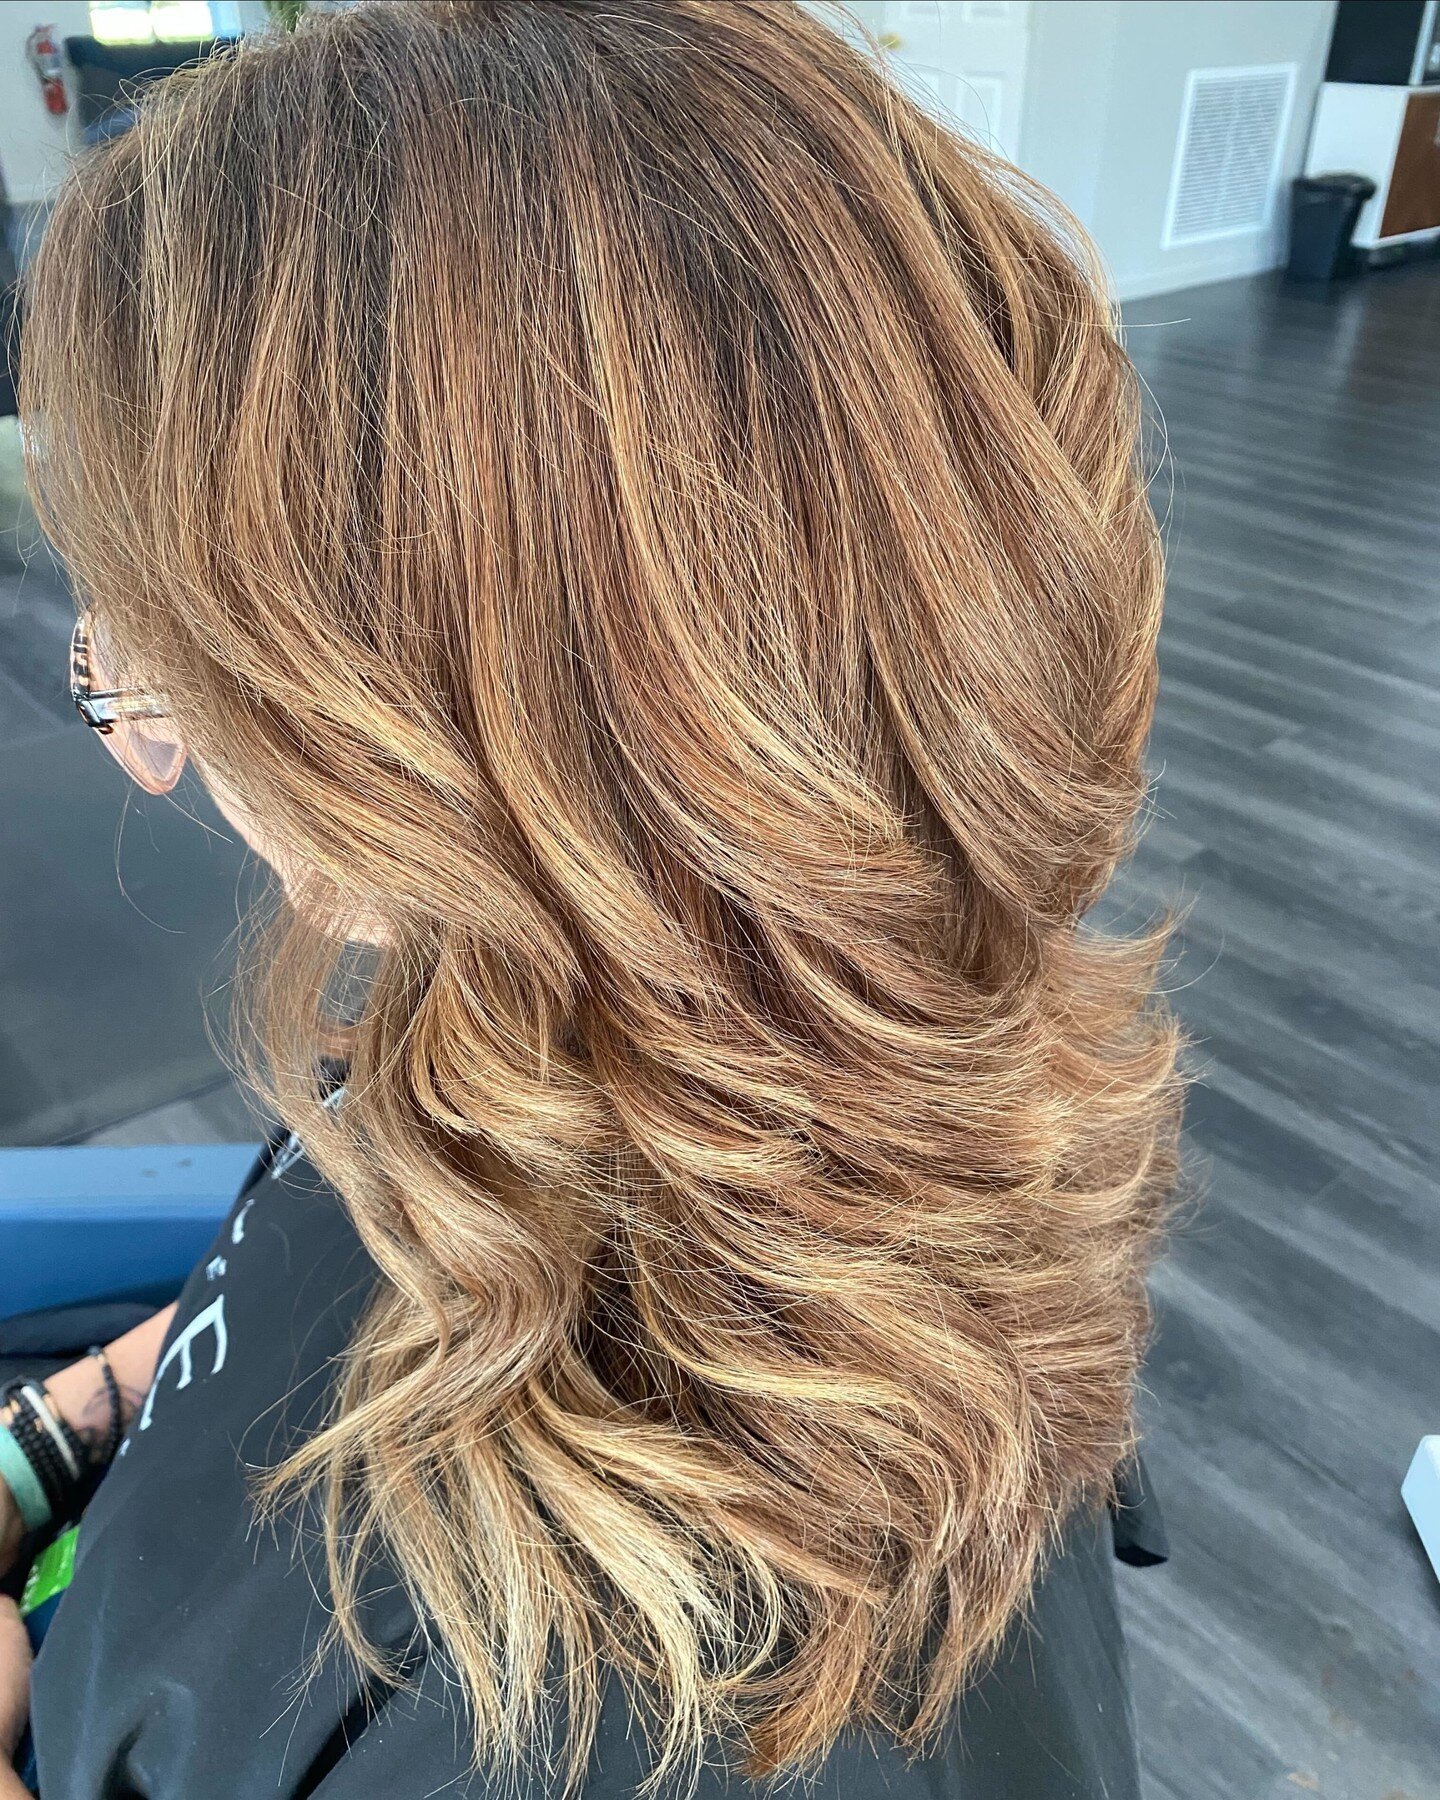 ☀️Getting ready for summer! ☀️⠀
⠀
Our Master Stylist, Melissa, began transforming these locks a few weeks back to ensure the client's summer hair goals would be met on time. Here Melissa went with a heavy highlight, and sandy toner to begin the proce